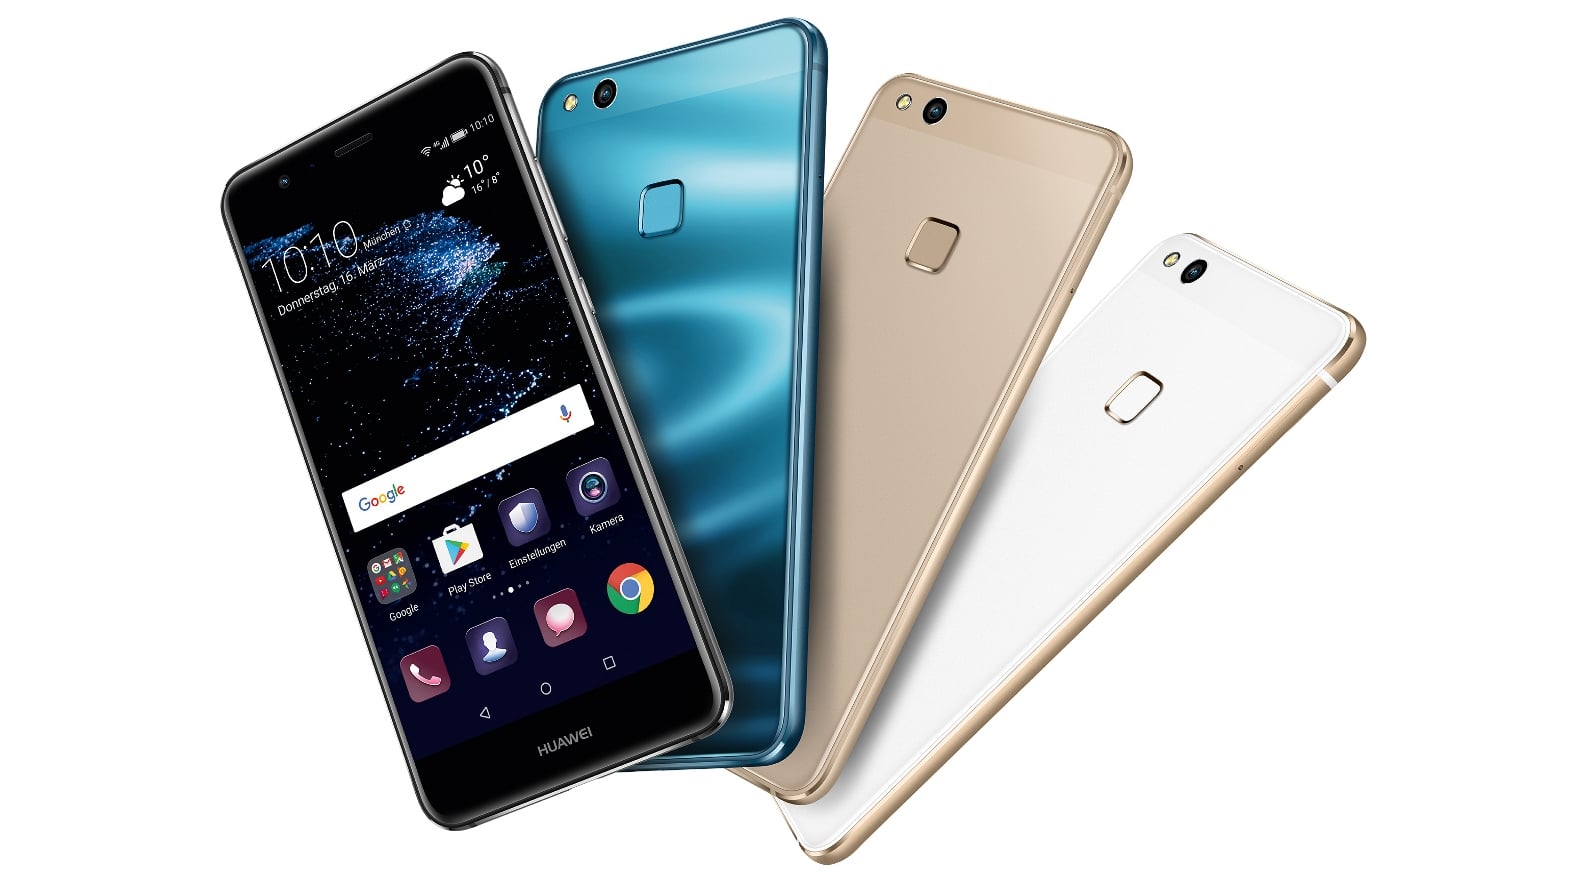 Huawei, the leading telecommunications company has yet again changed the game with the launch of its latest device – Huawei P10 Lite in Pakistan.